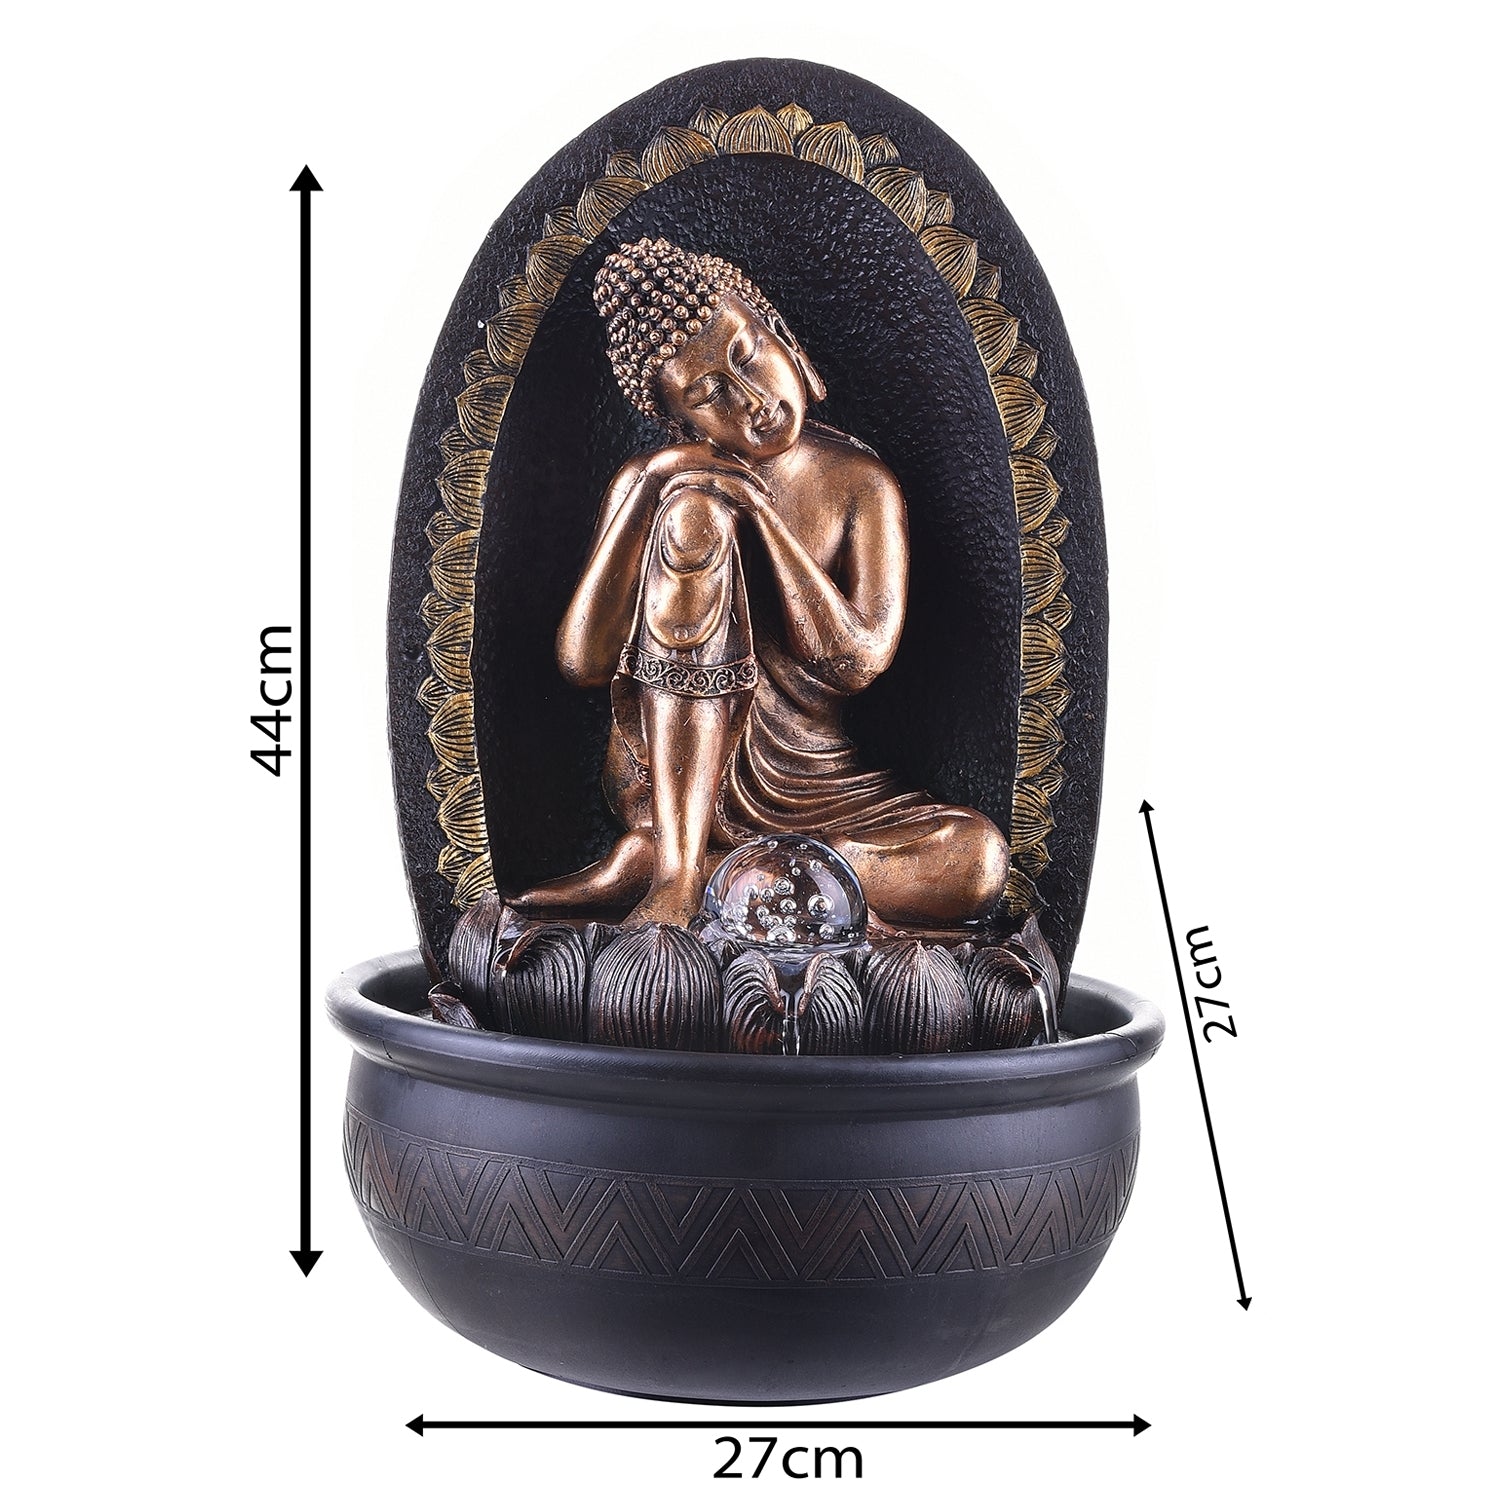 Polystone Brown and Golden Buddha On Knee Statue Water Fountain With Crystal Ball for Home/Office Decor 1